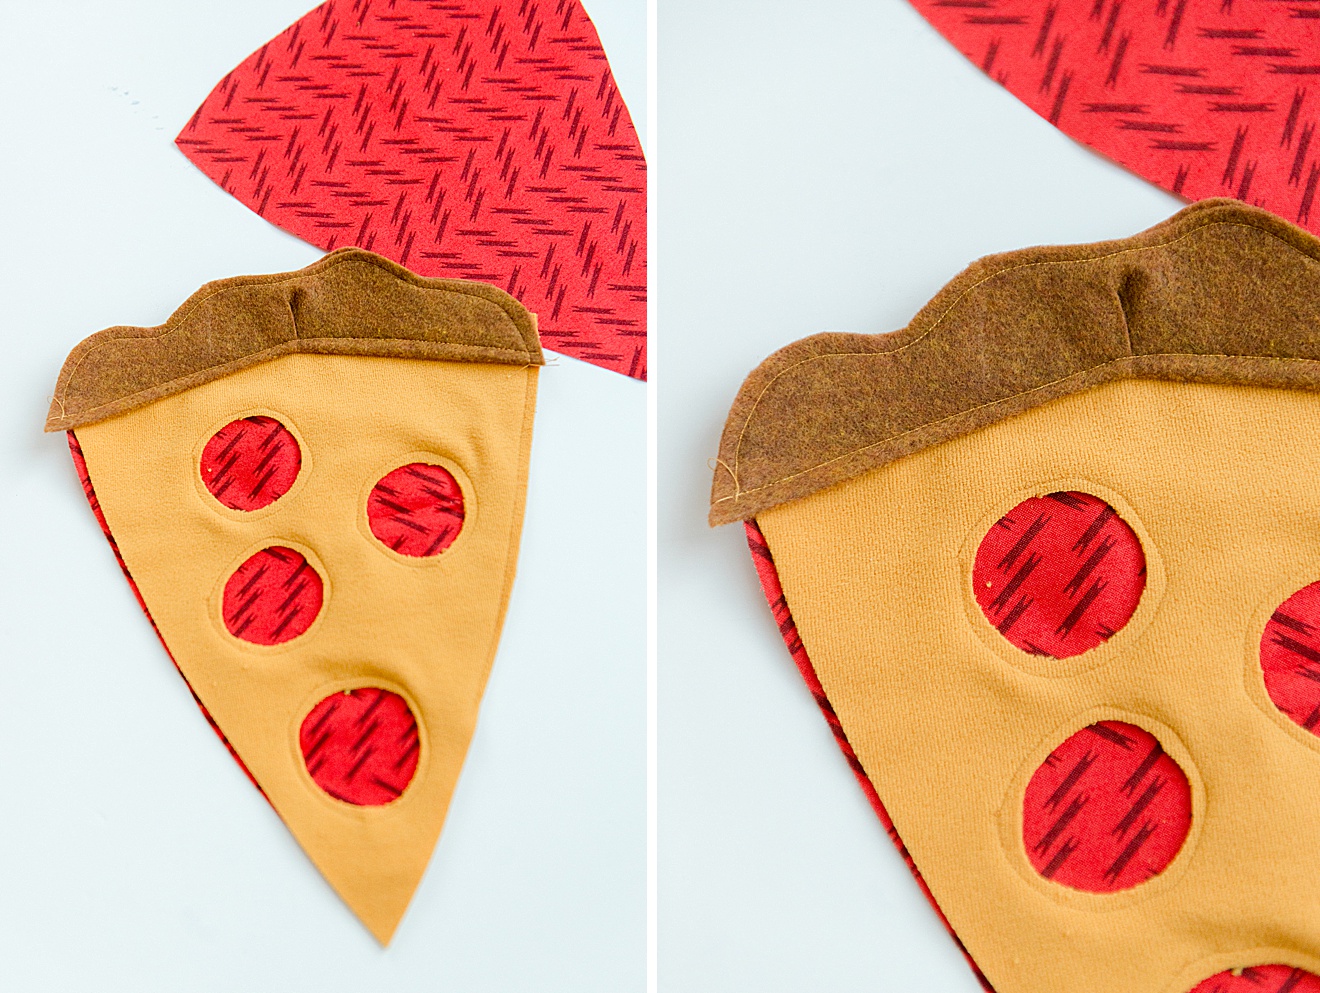 How to make a pizza pouch, how to sew a pizza pouch, pizza pouch DIY, janome sewing, sewing pattern, free sewing pattern, how to sew a zipper pouch